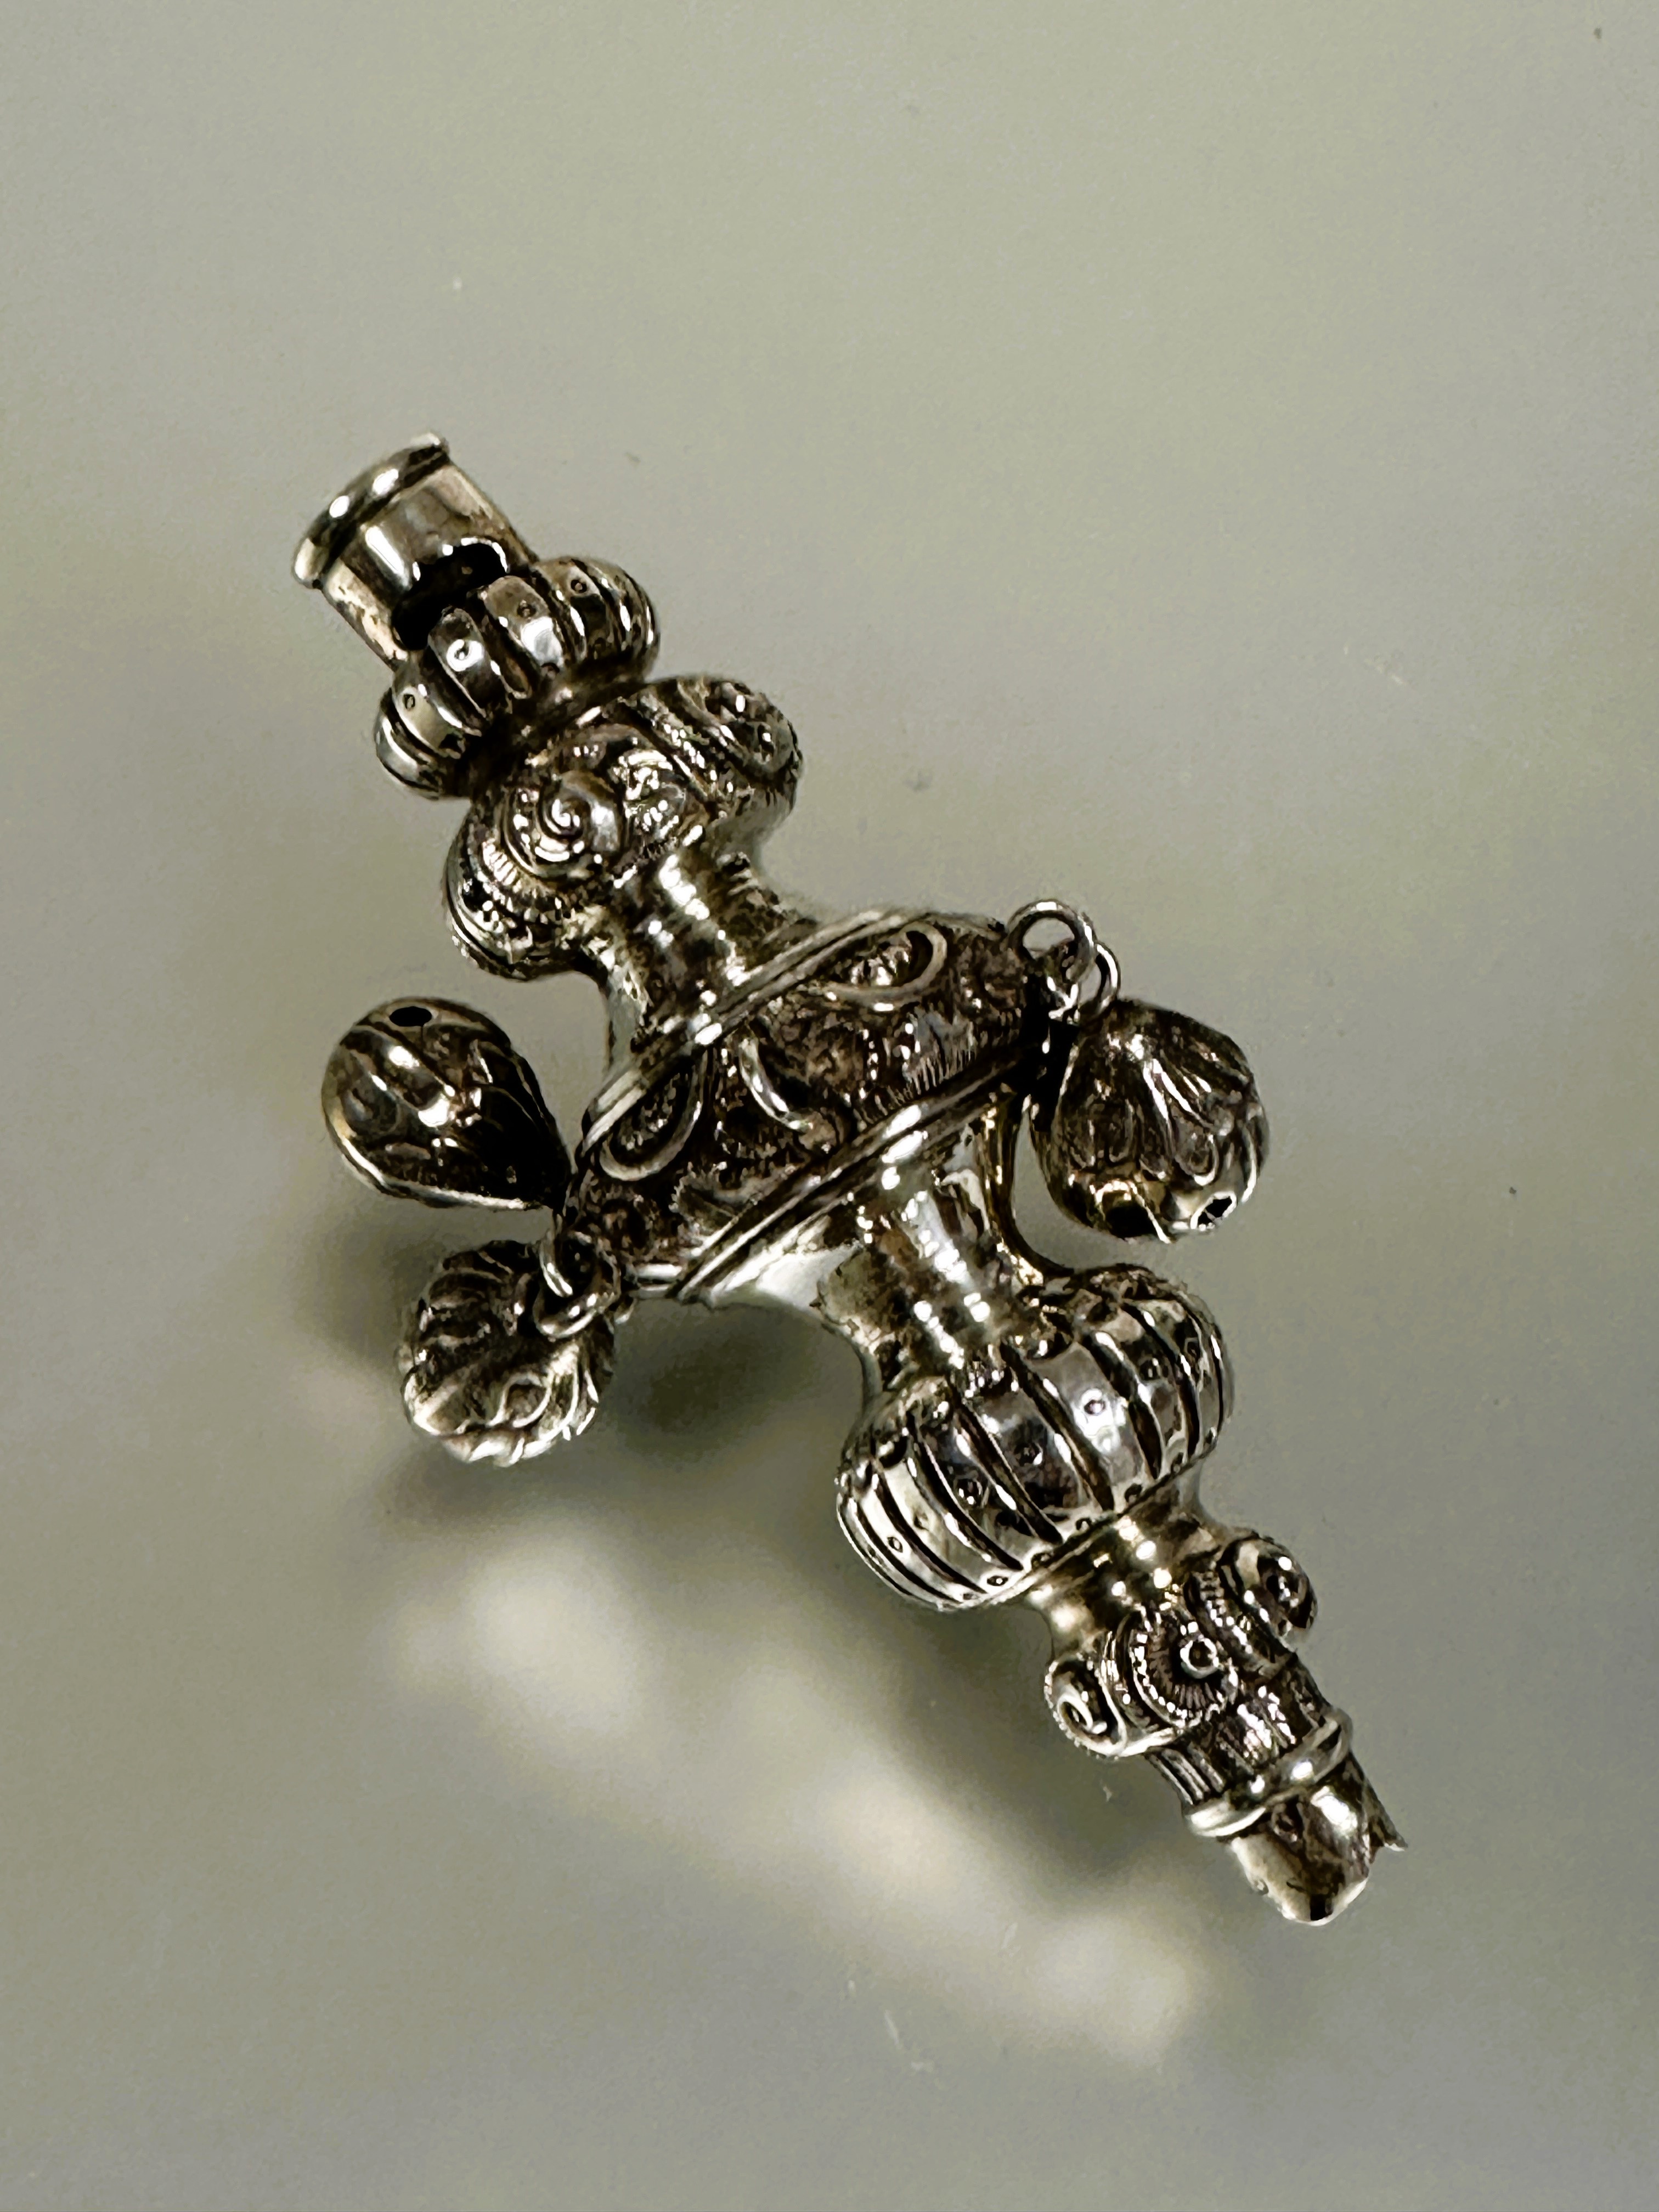 A 19thc white metal child's teething rattle/whistle of typical tiered form with cased scrolling